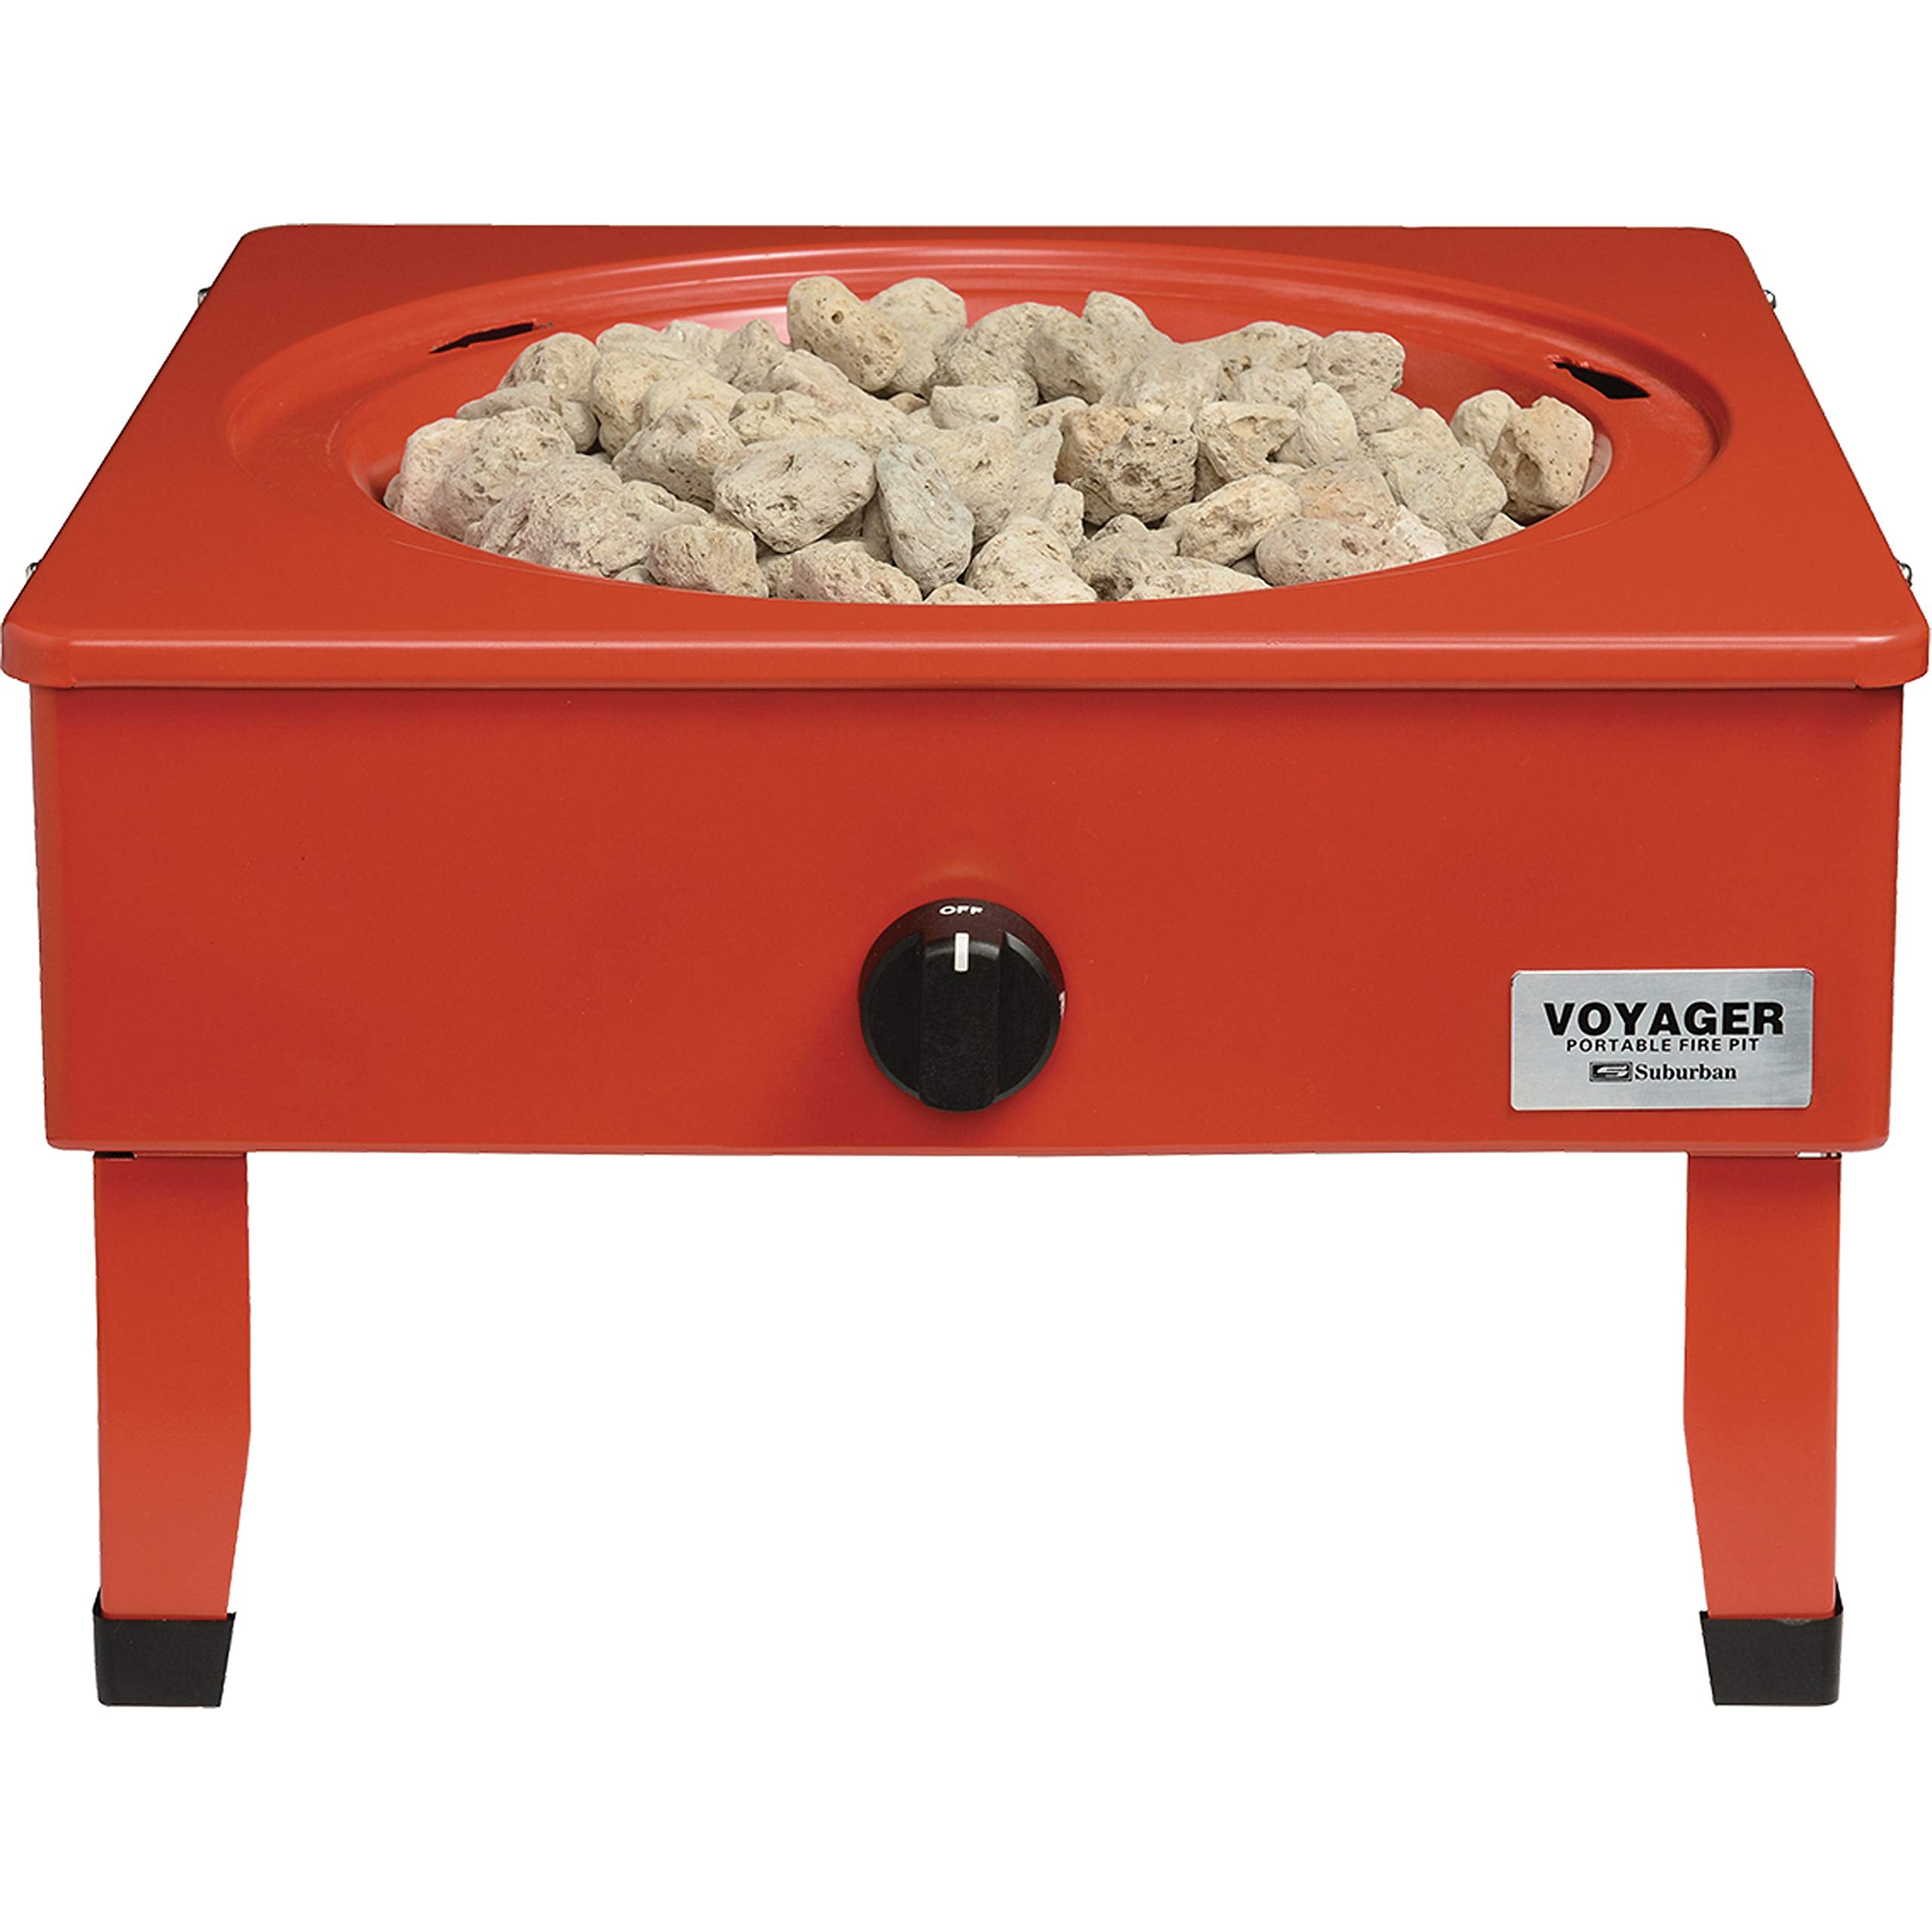 Suburban 3033A Voyager Fire Pit Portable